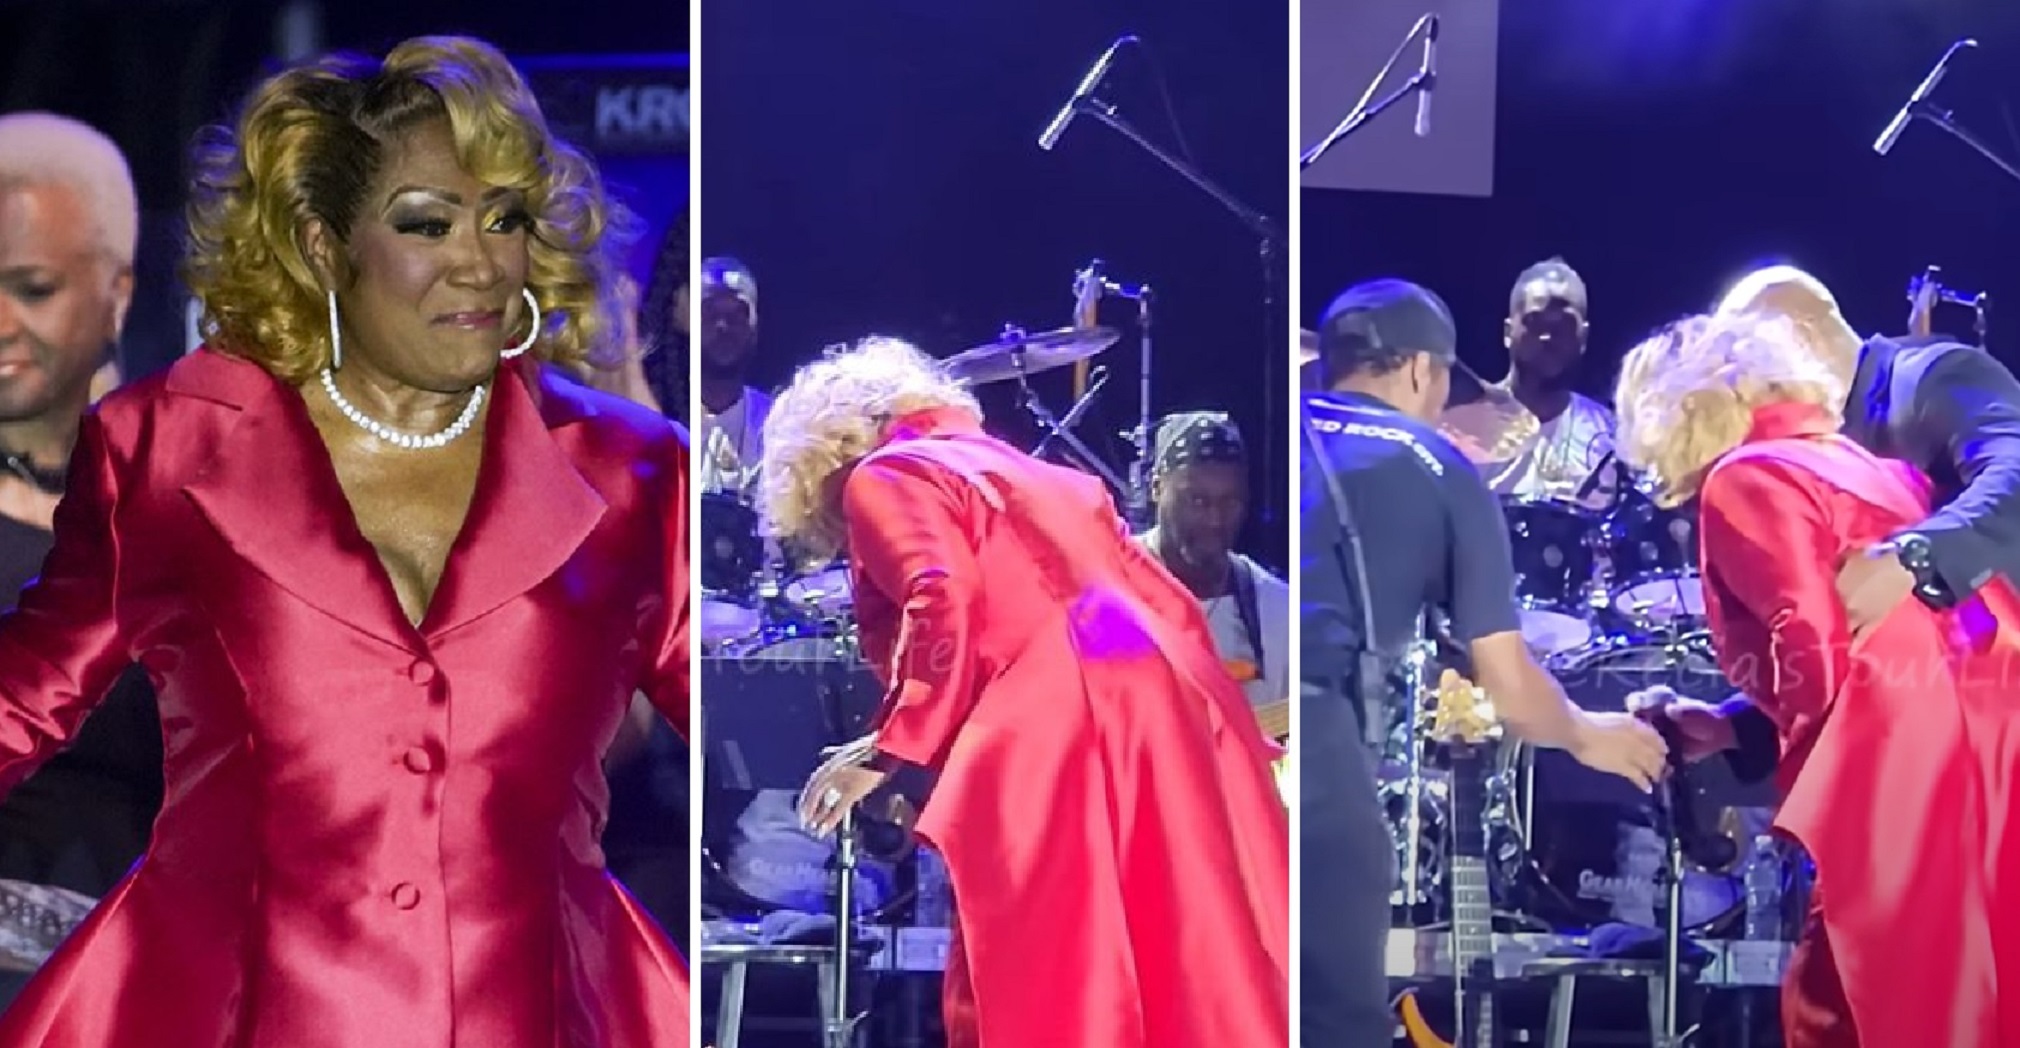 Patti LaBelle, 78, Gets Sick And Vomits On Stage In The Middle Of Concert Performance [Video]